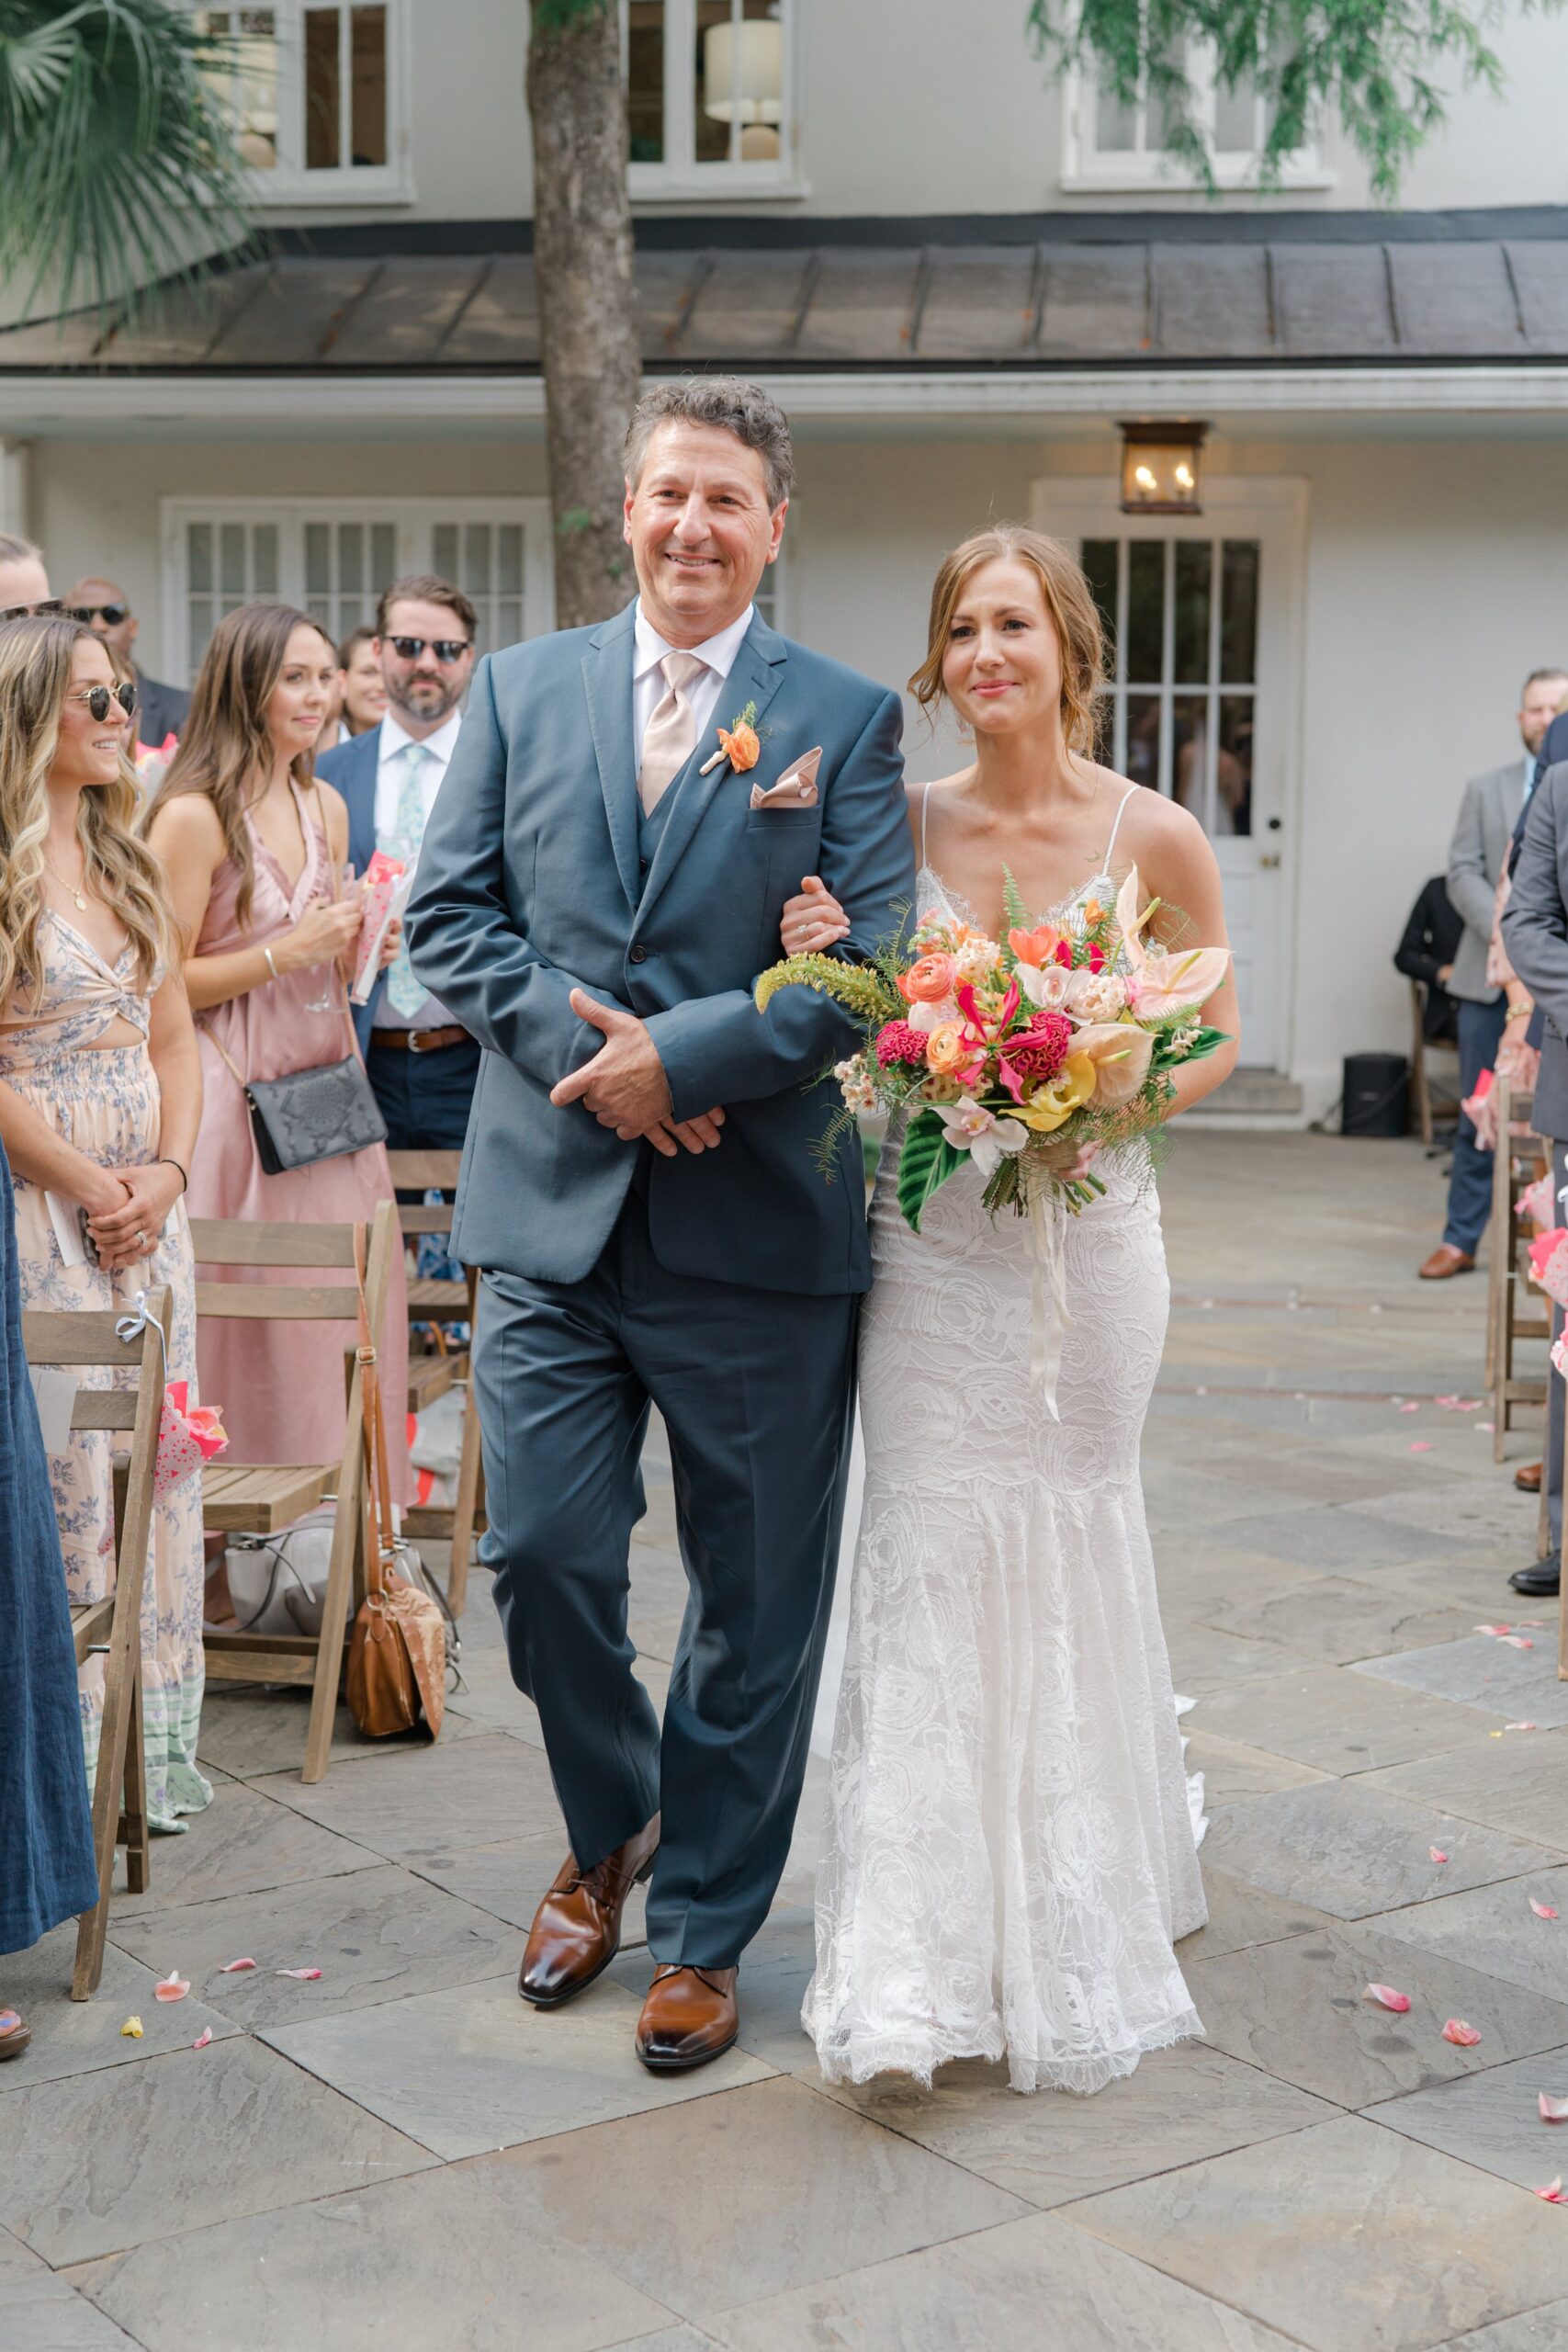 Emotional bride with tropical flowers walks to groom at outdoor wedding ceremony in Charleston.